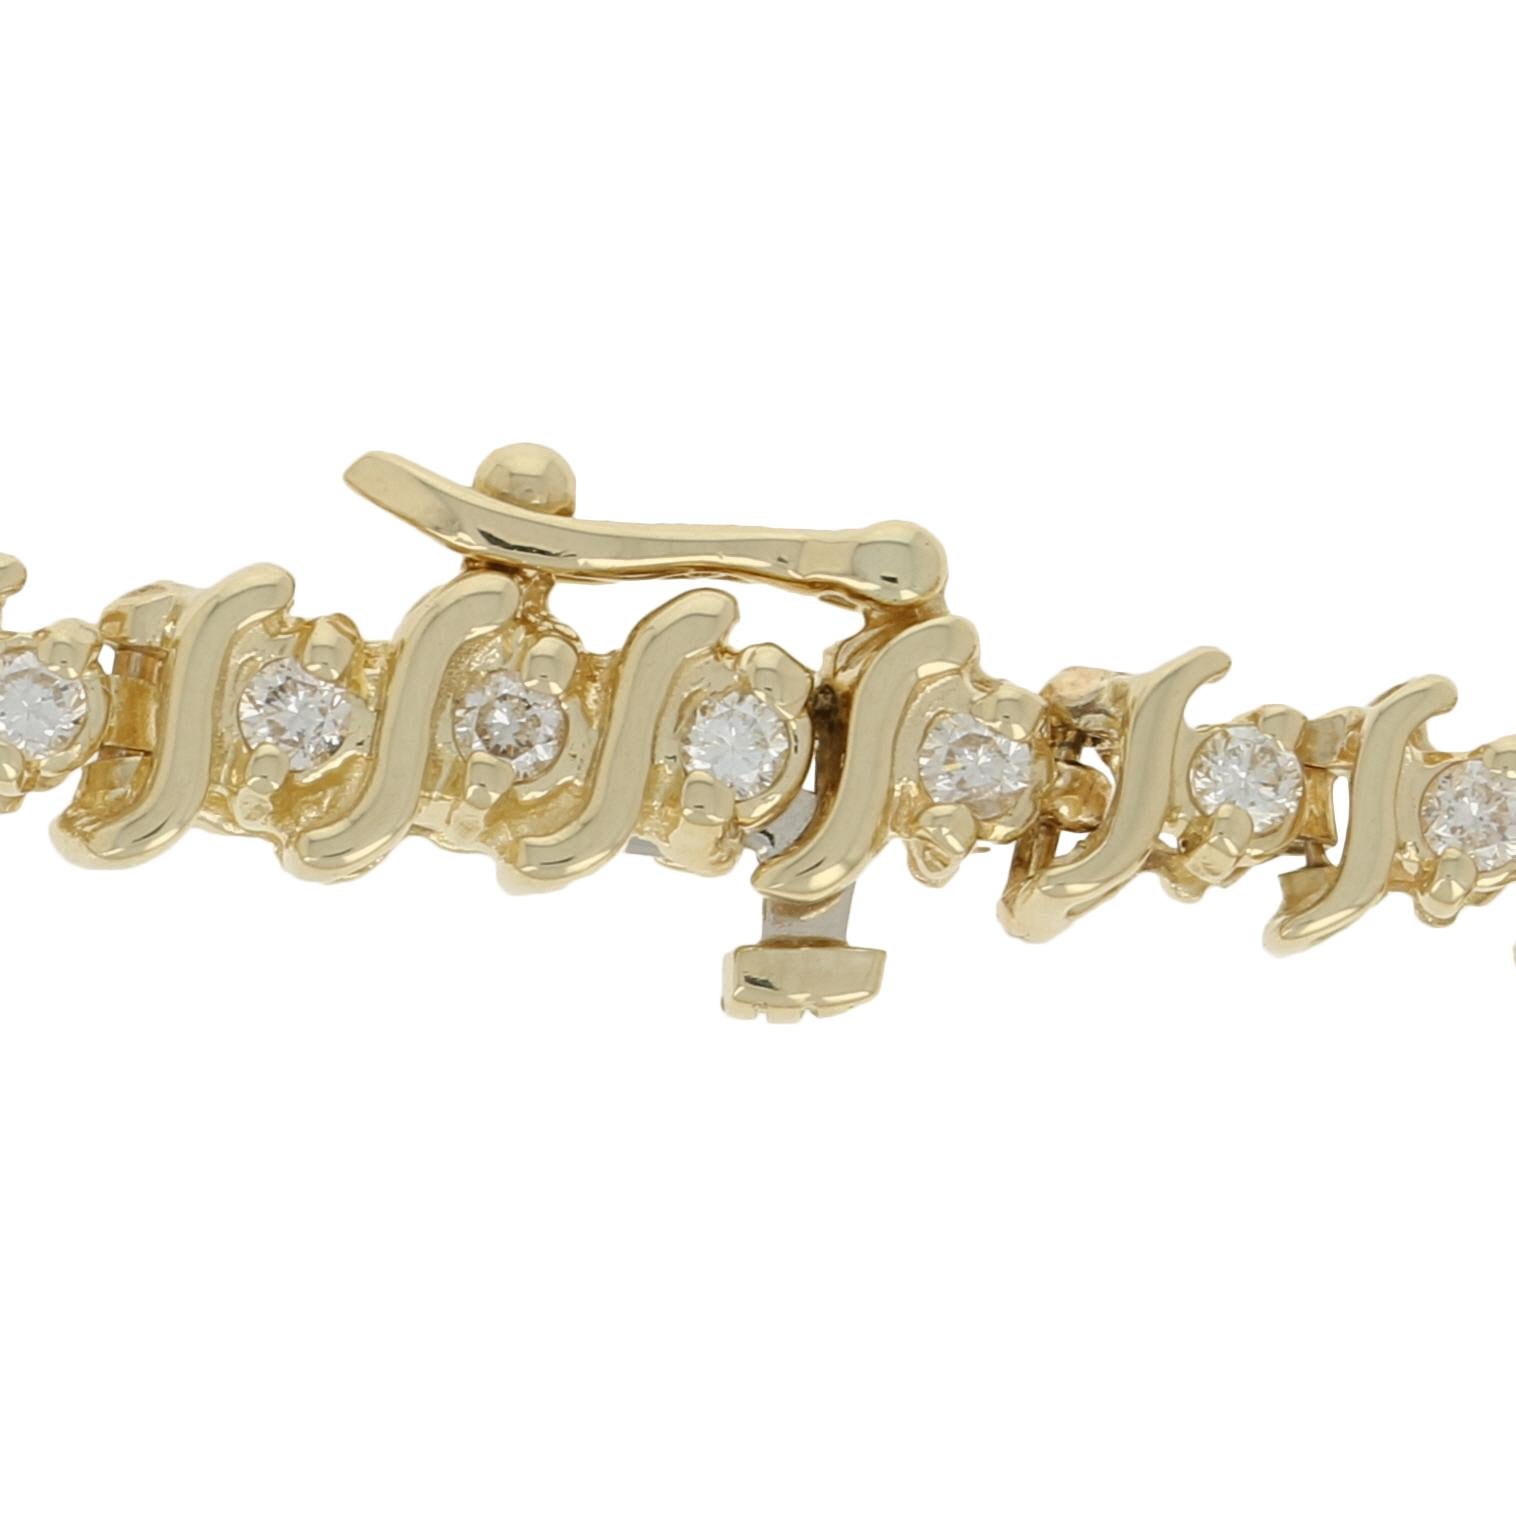 No matter the season, this exceptional piece will always dazzle! This 14k yellow gold tennis bracelet showcases white diamonds set between gracefully curved gold bars for the perfect balance of sparkle and shine. 

Metal Content: Guaranteed 14k Gold